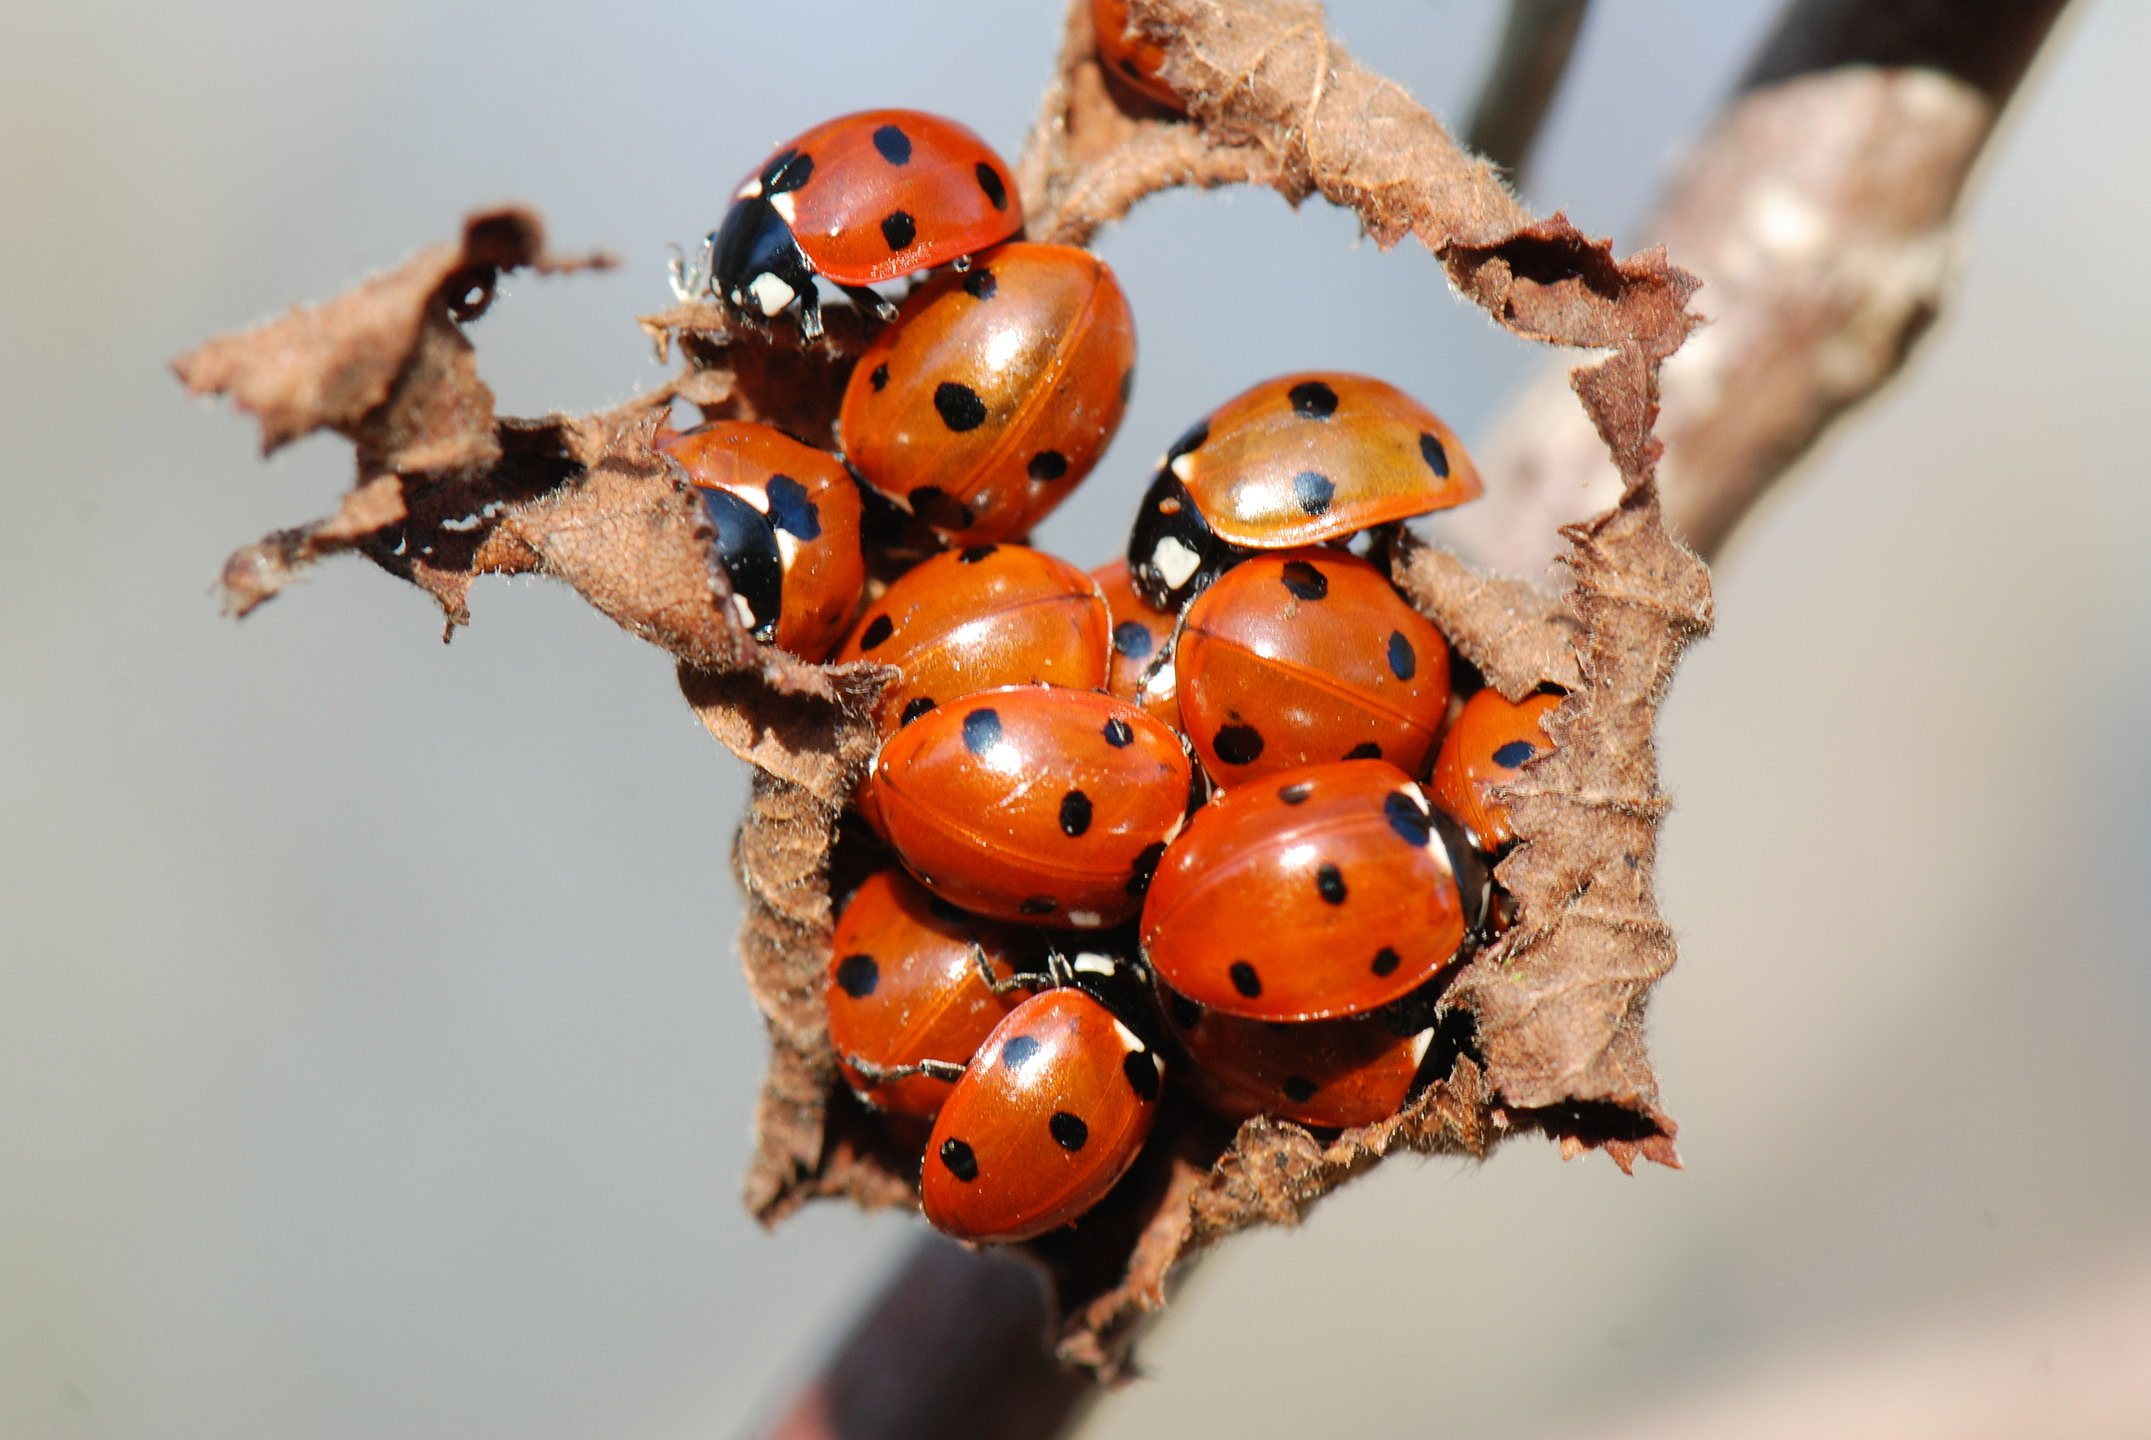 The 7-spot Ladybird Coccinella septempunctata is common everywhere. Here, a group is hibernating on a twig.